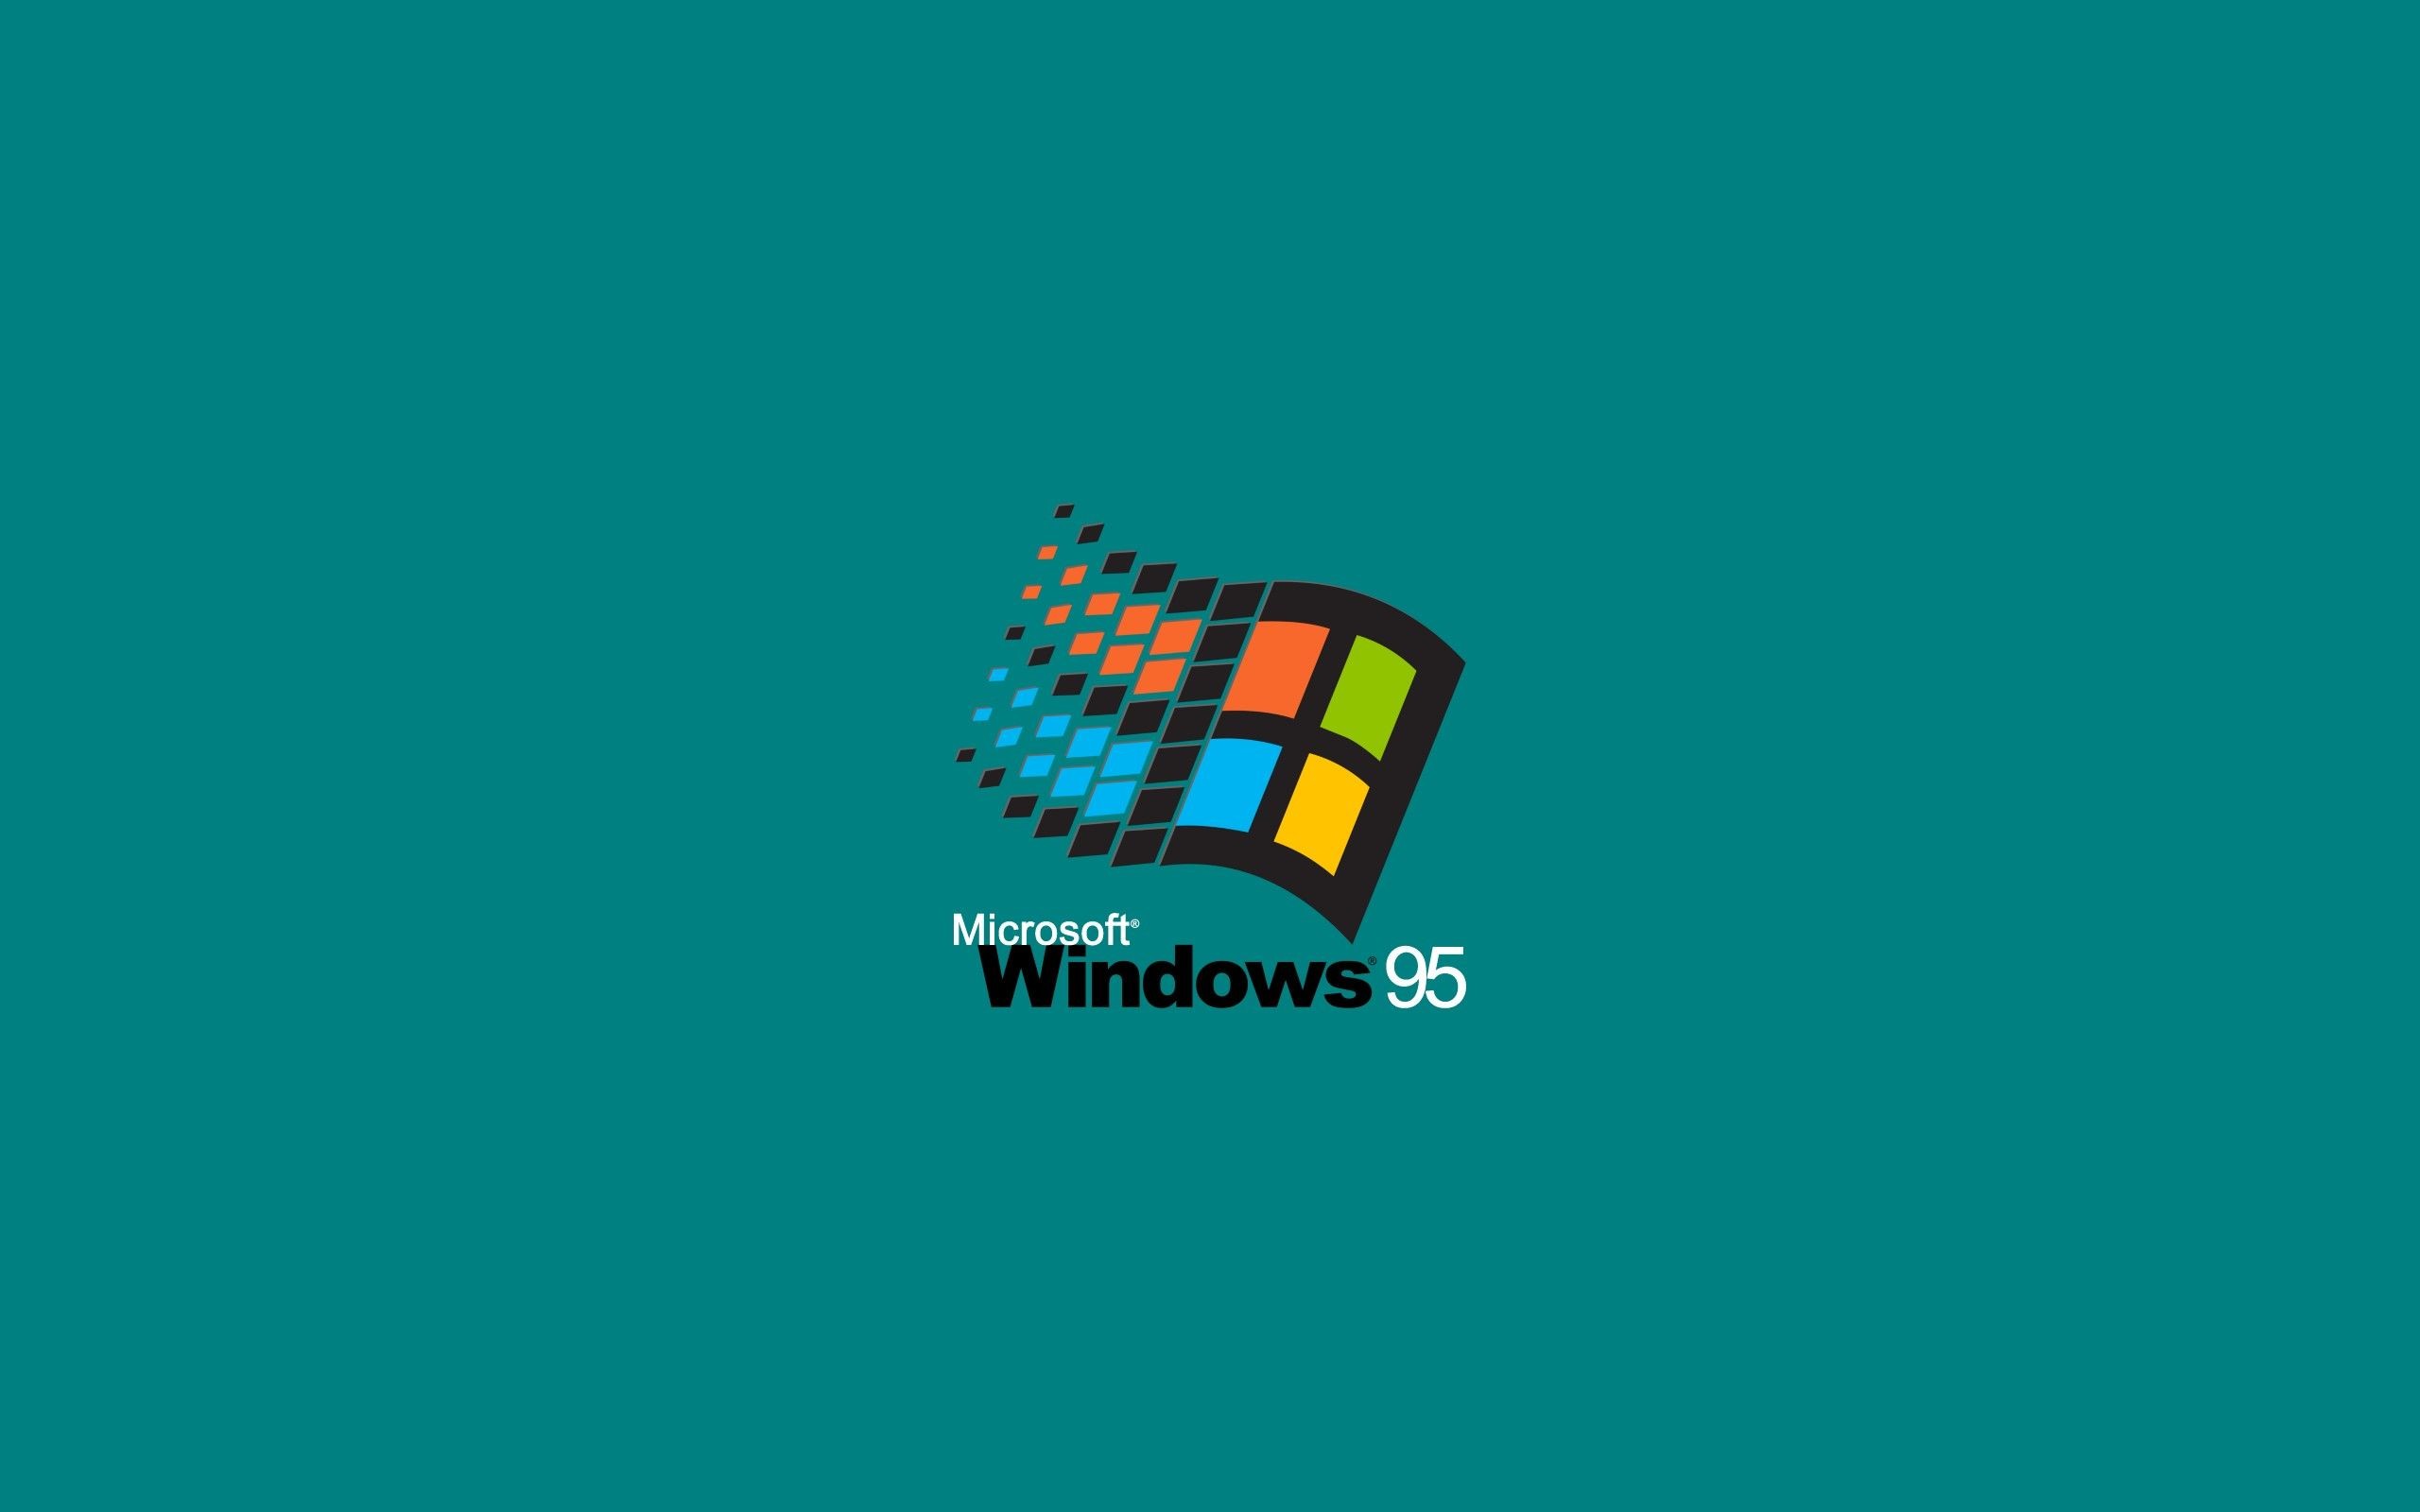 2560x1600 1920x1200 HD Windows Logo Wallpapers (59+ images)">